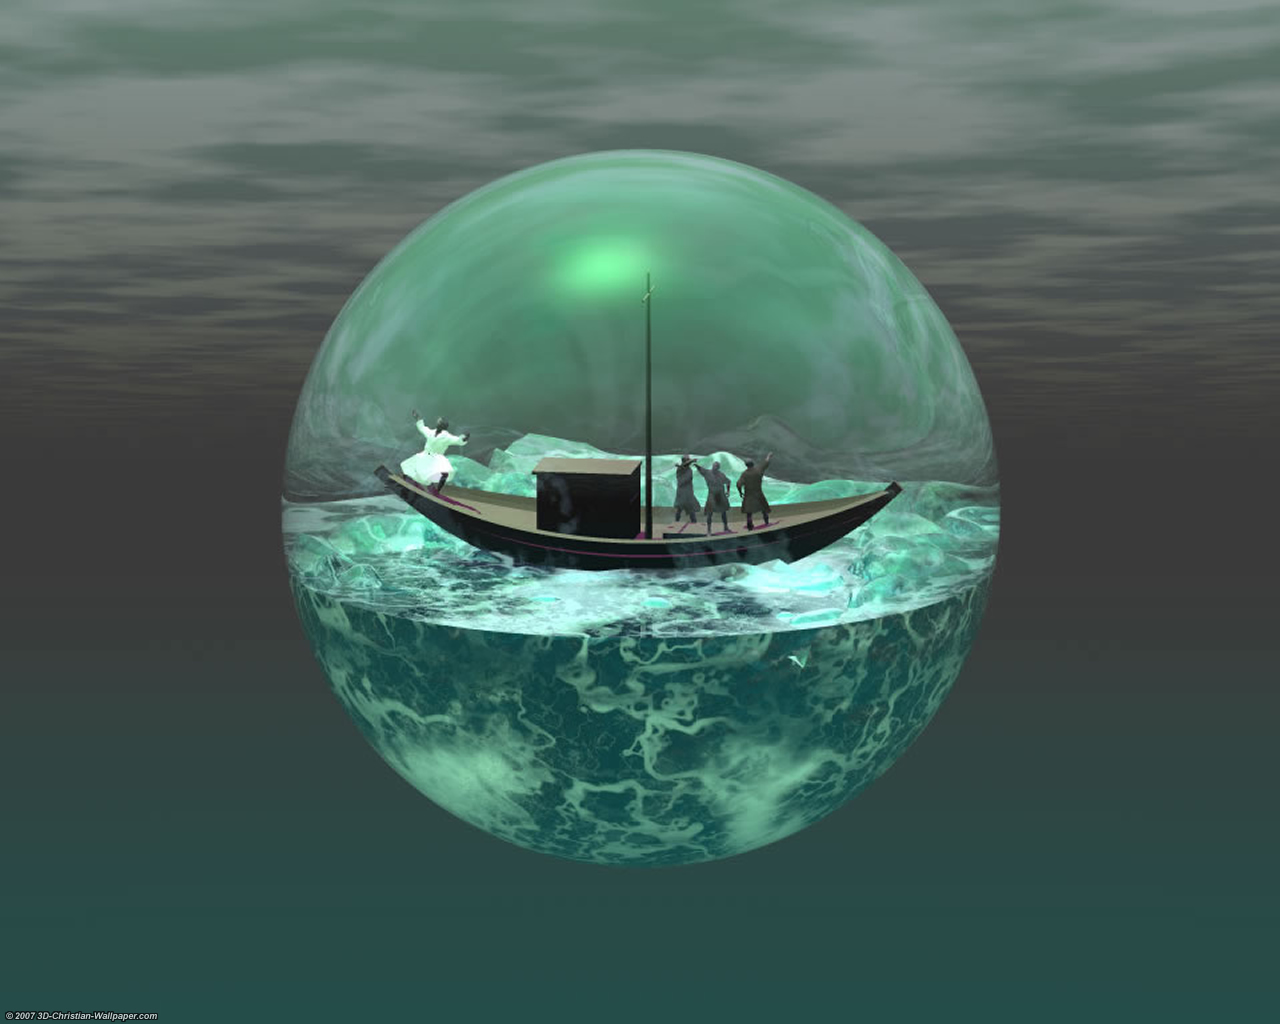 3d christian wallpaper,water,sphere,green,water resources,sea